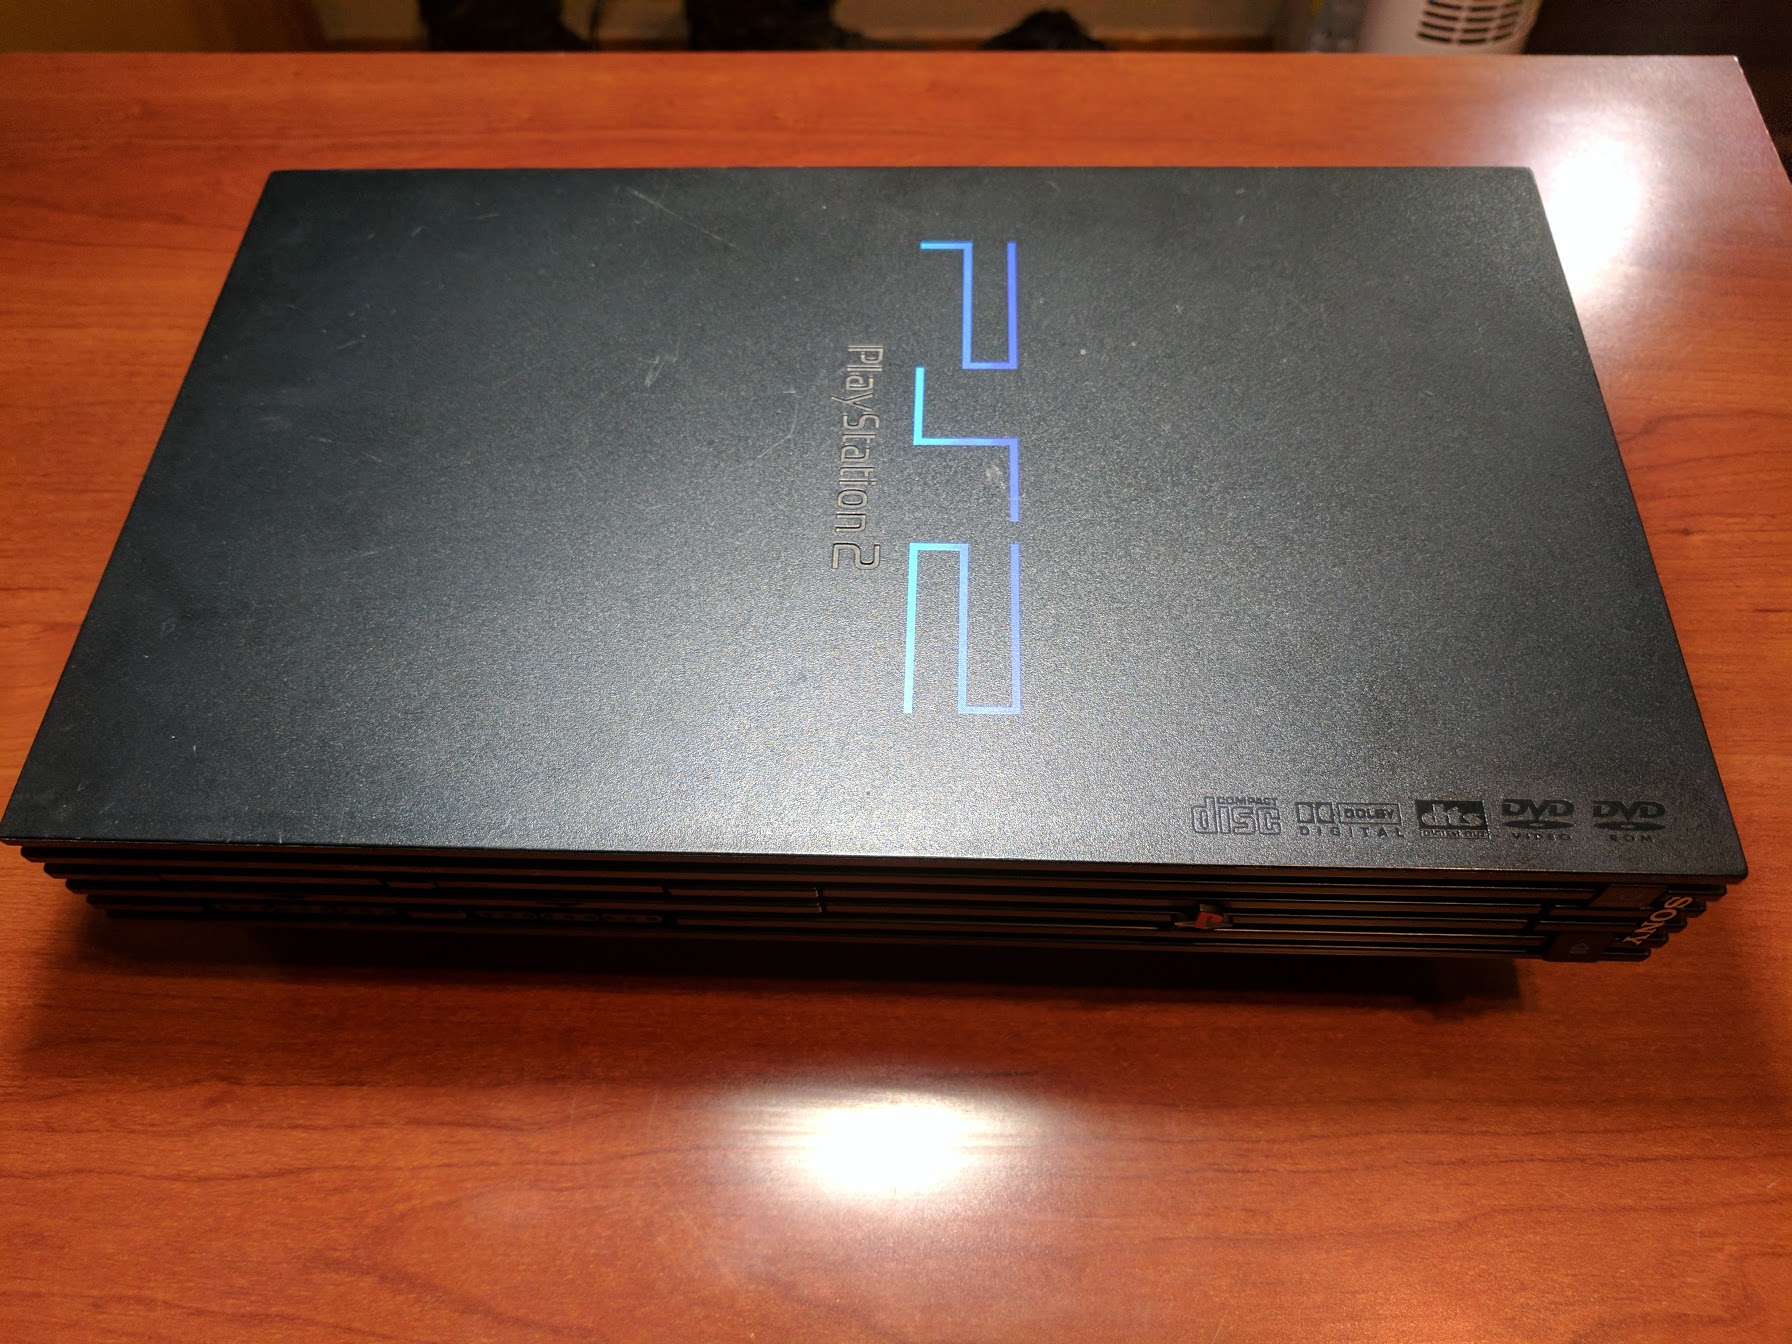 SCPH-39001 PS2